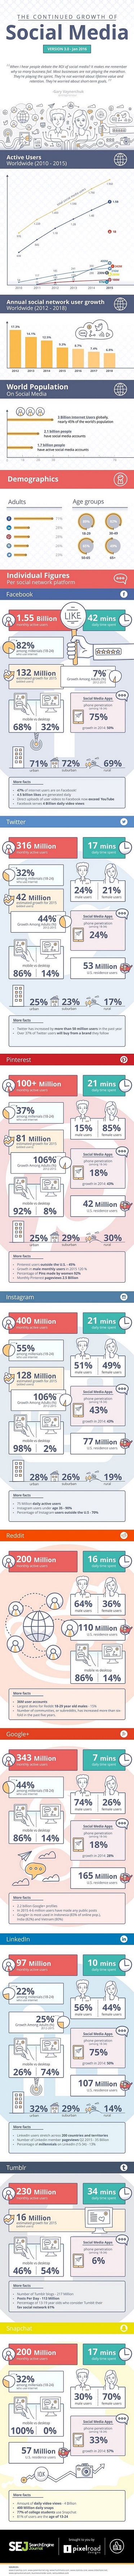 Growth Of The Social Media